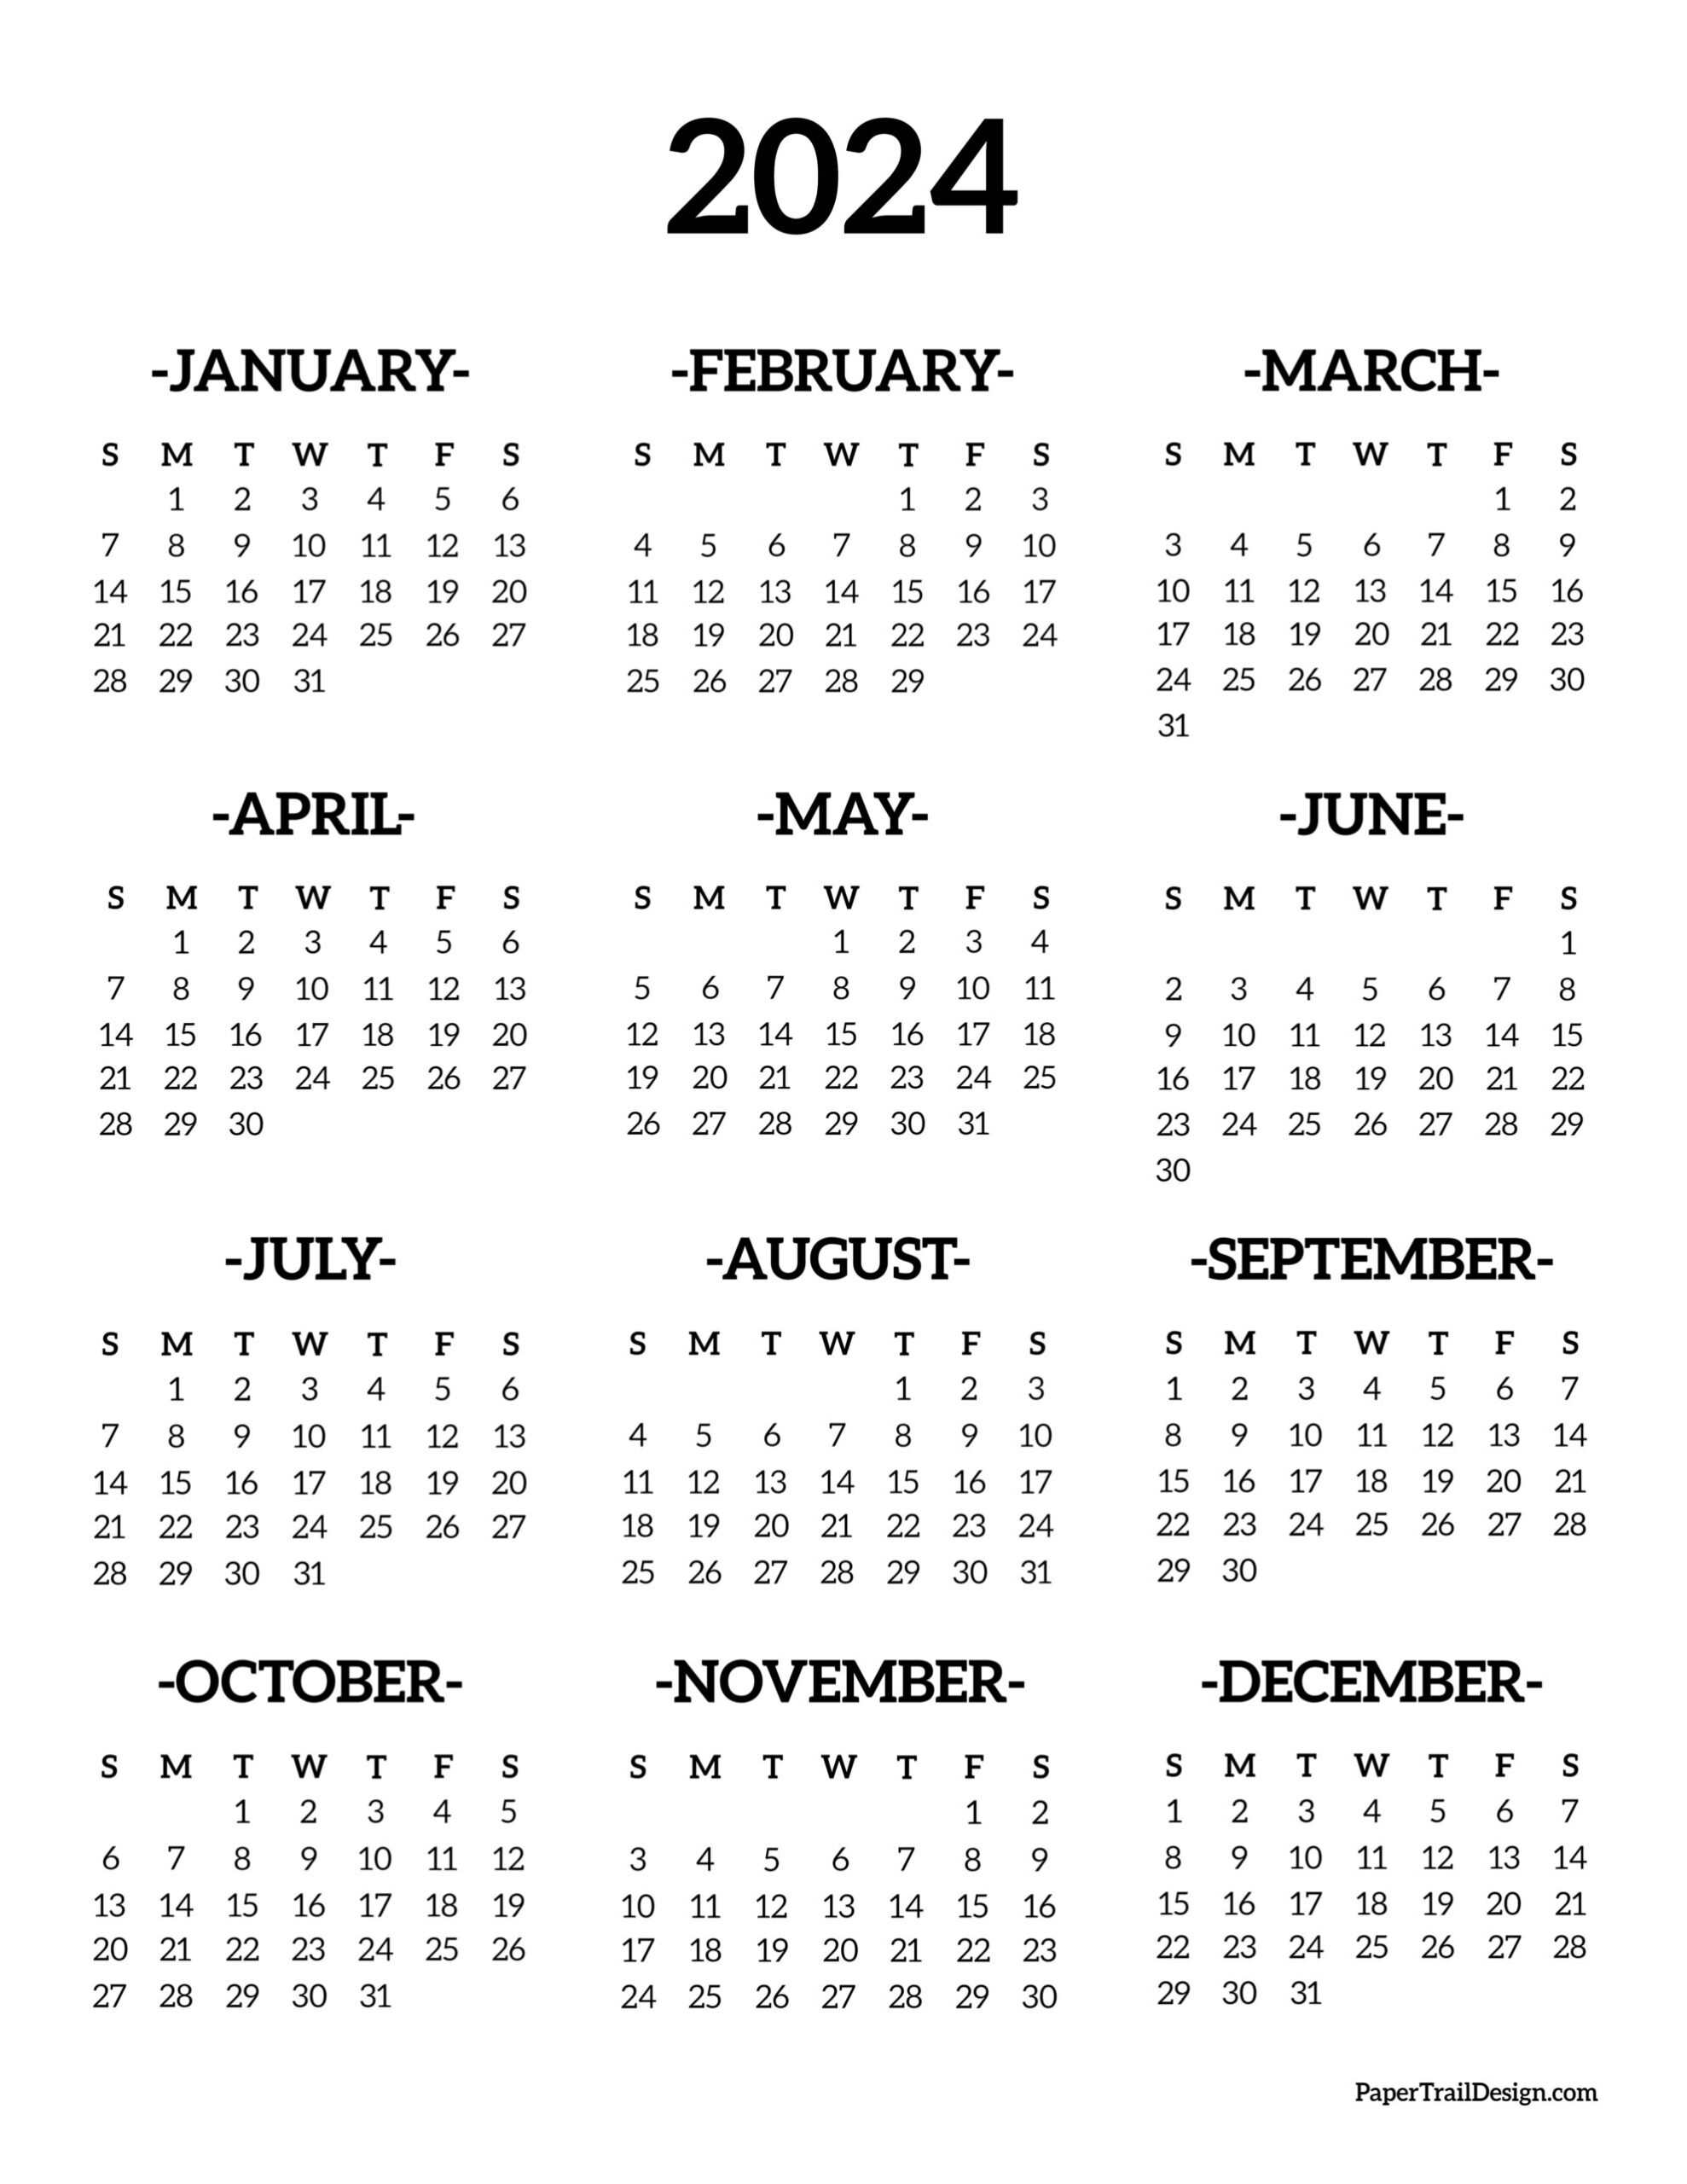 Calendar 2024 Printable One Page - Paper Trail Design | Printable 2024 Calendar By Year